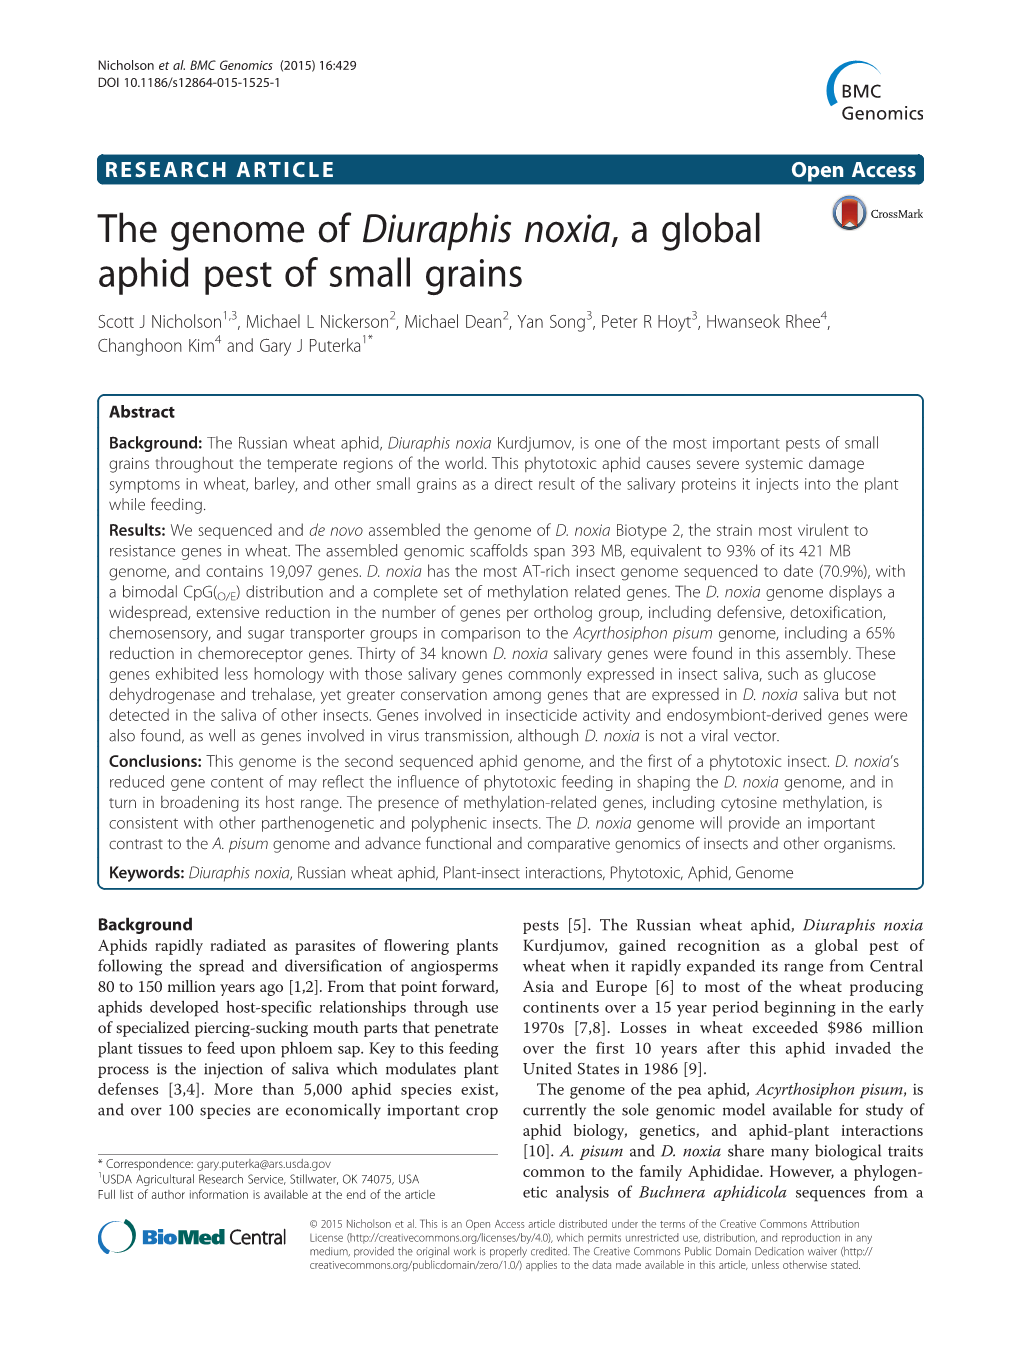 The Genome of Diuraphis Noxia, a Global Aphid Pest of Small Grains